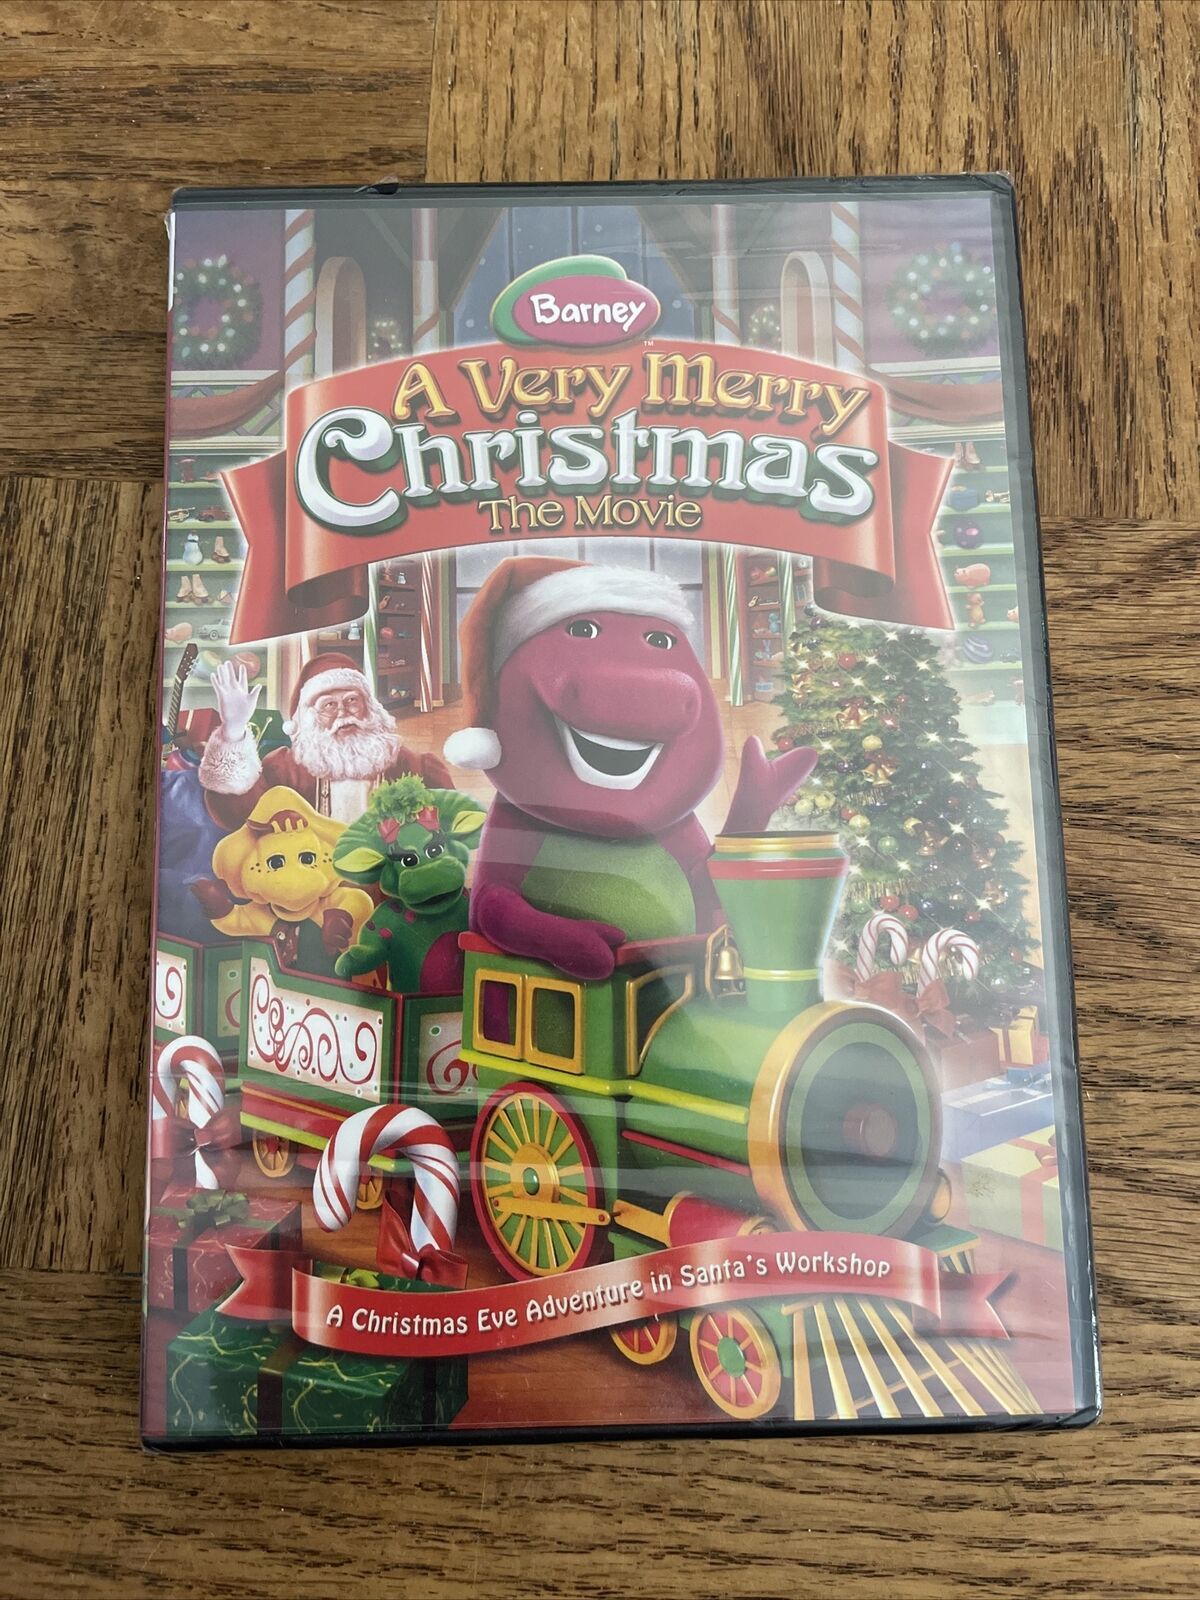 Barney A Very Merry Christmas The Movie DVD - DVDs & Blu-ray Discs